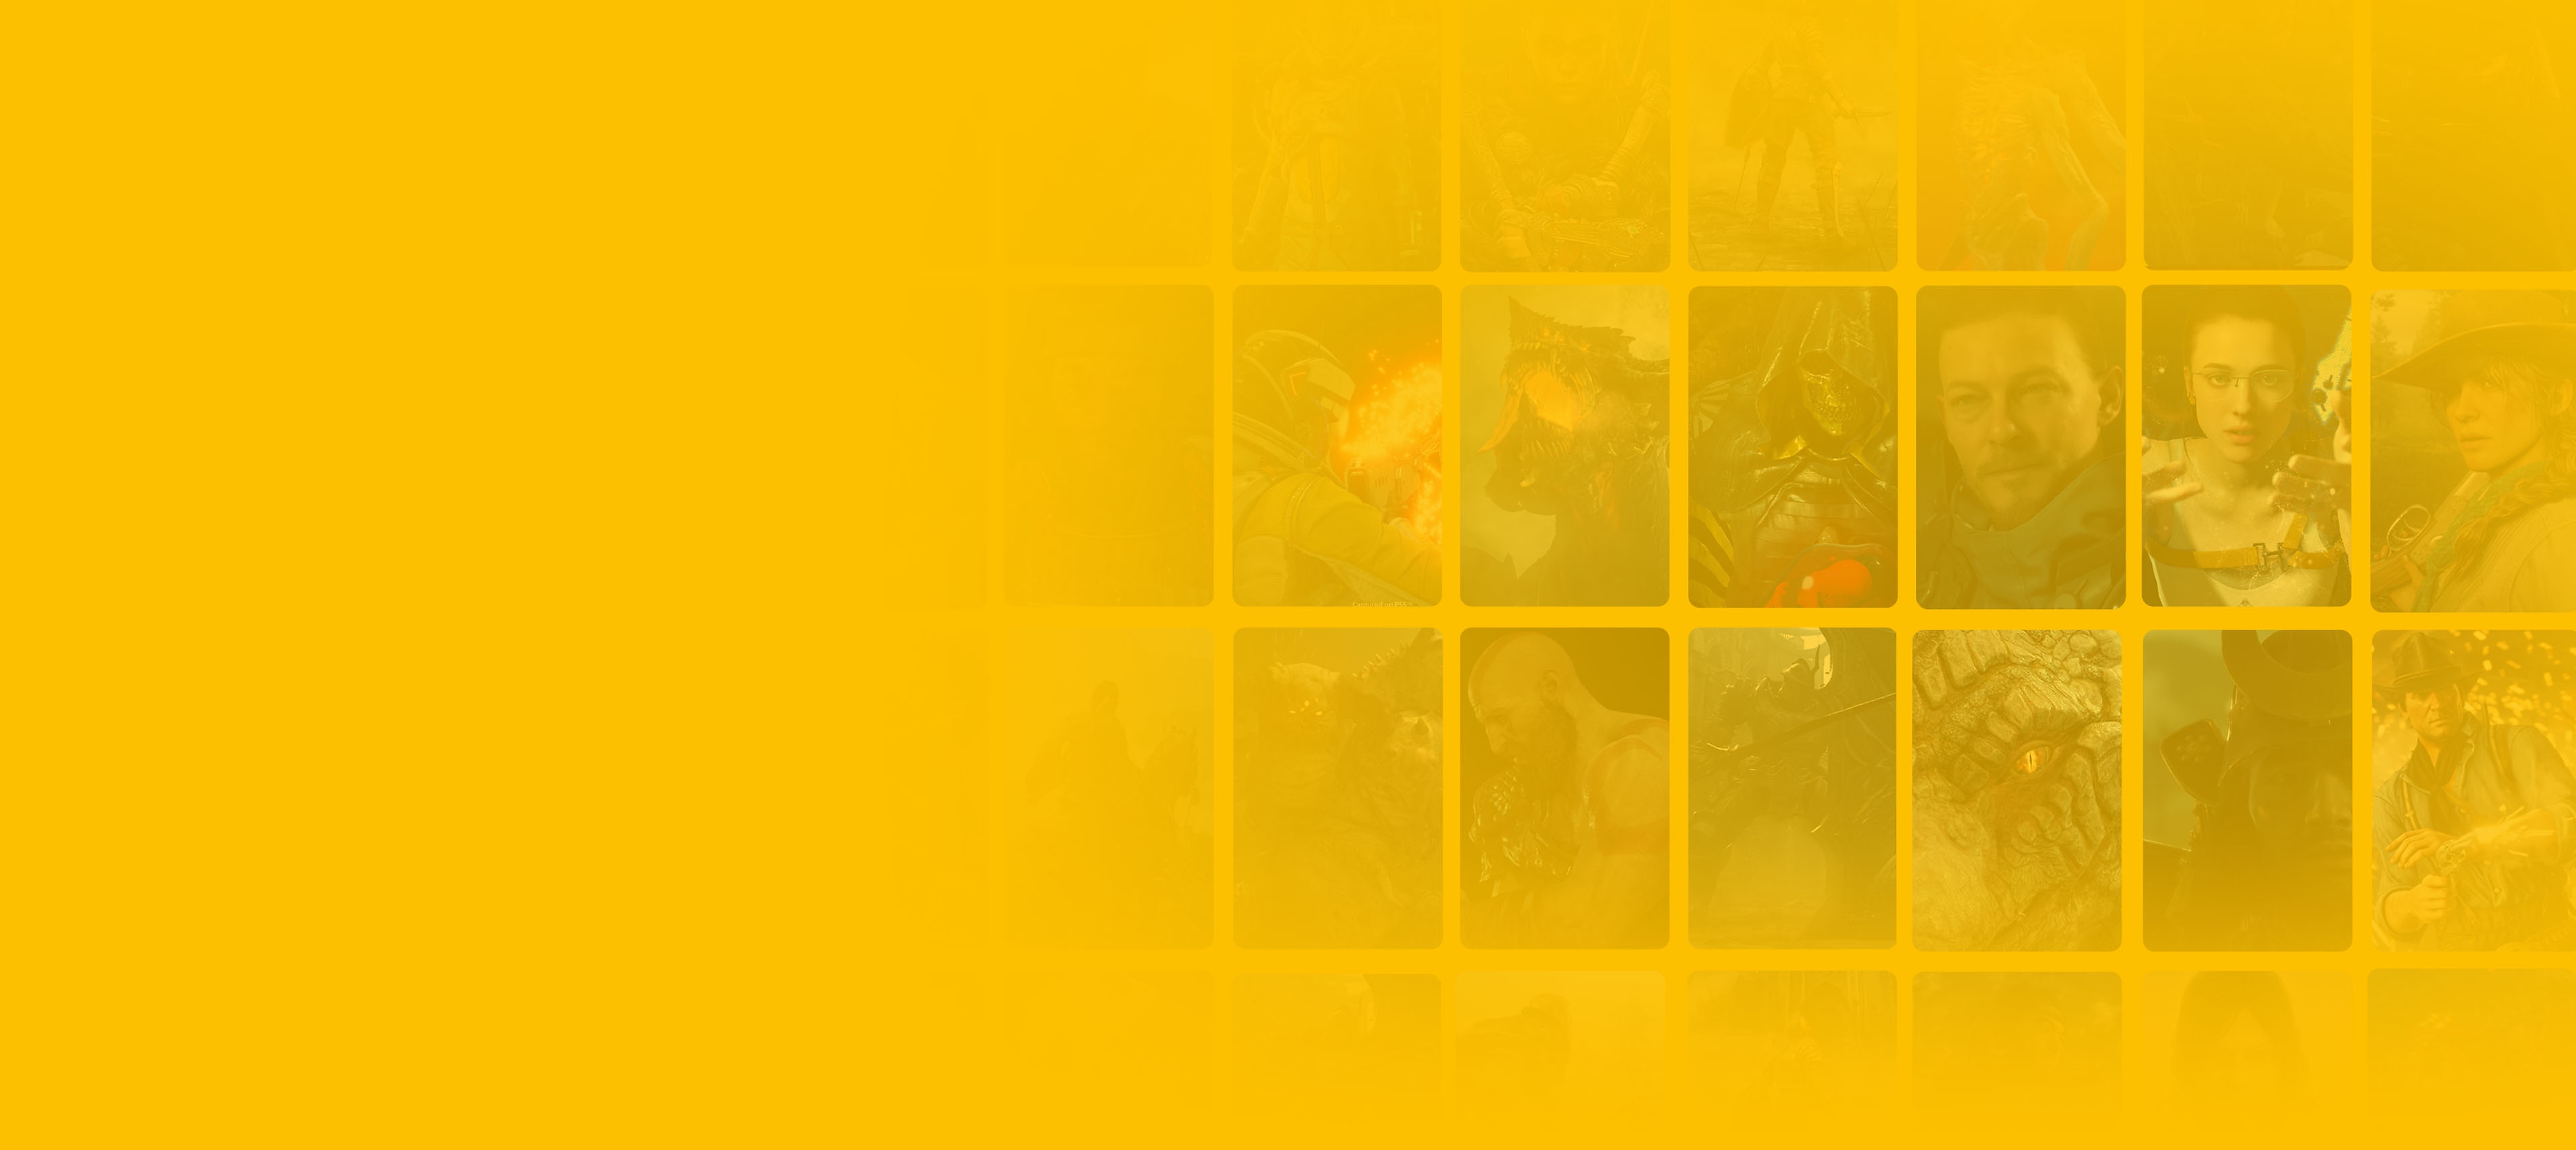 Yellow background with games grid